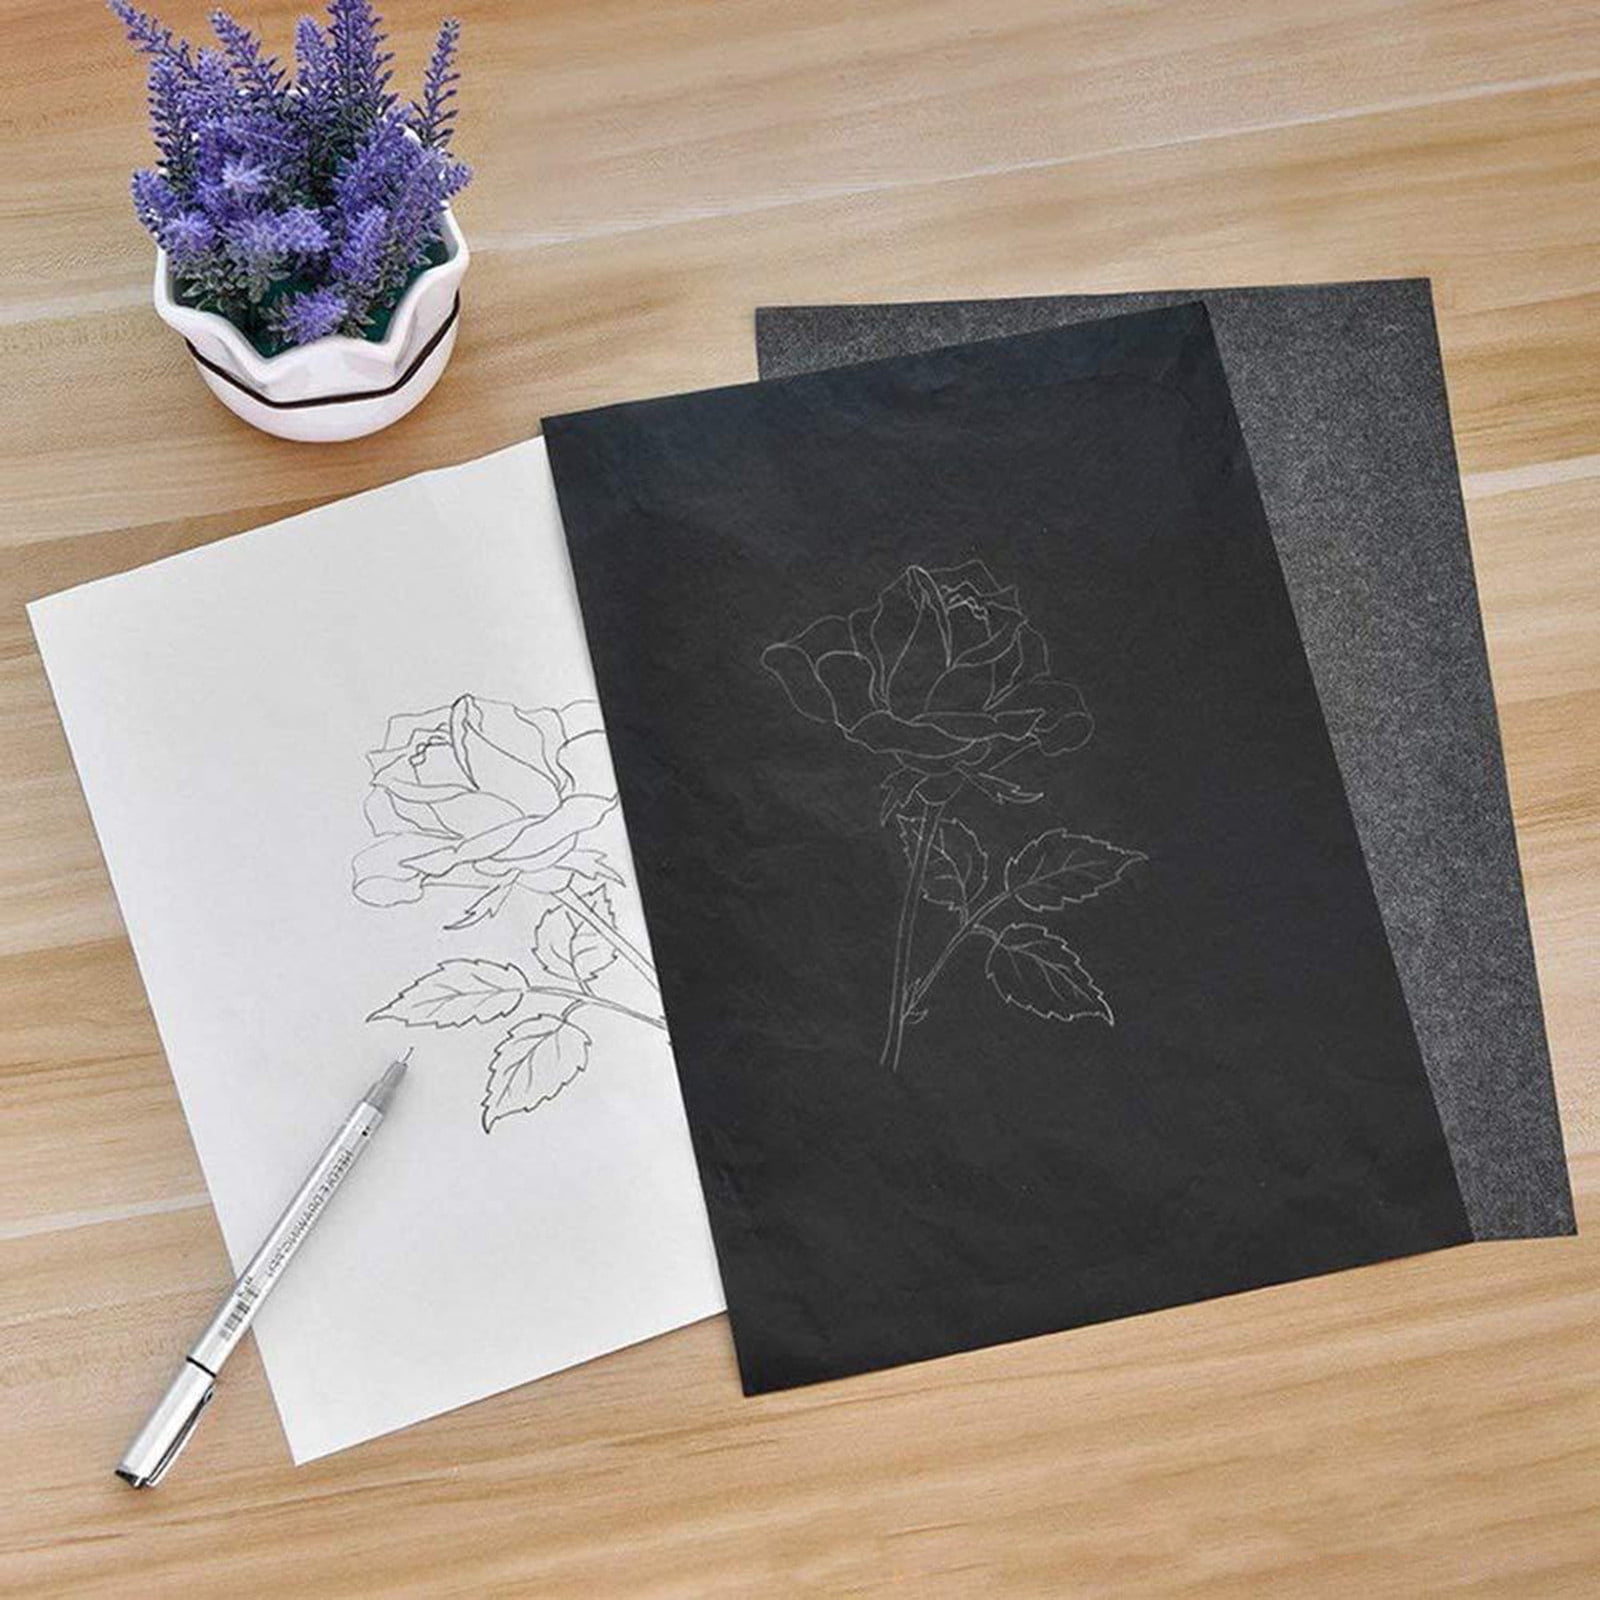 100 Sheets Carbon Transfer Paper,Blue Carbon Copy Paper Tracing Paper with  5pcs Double-end Embossing Stylus for Wood,Paper,Canvas and Other Art